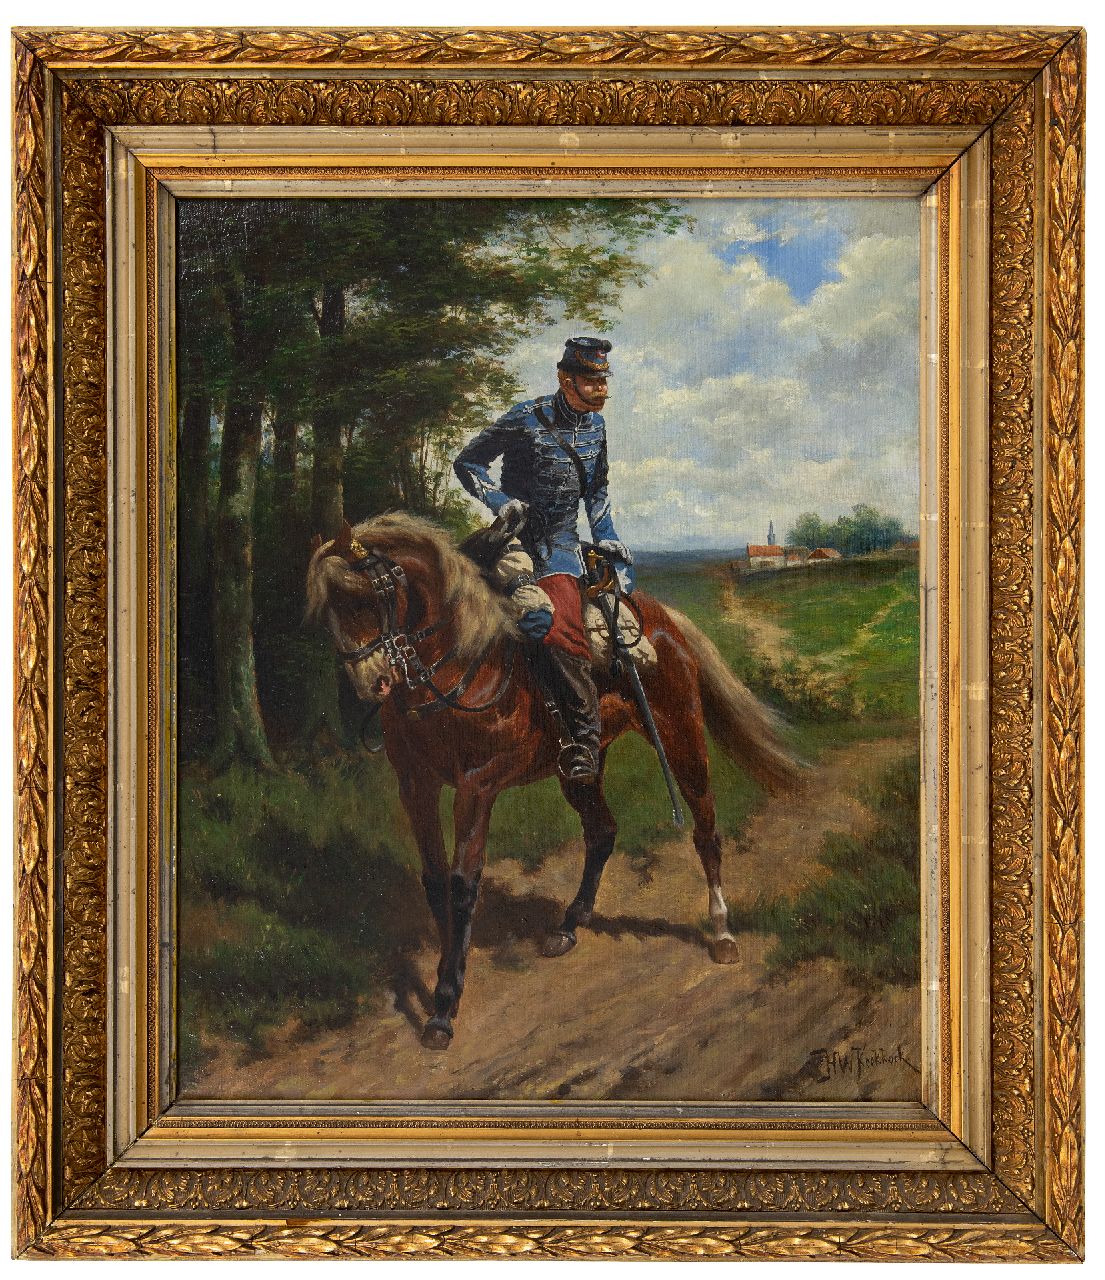 Koekkoek H.W.  | Hermanus Willem Koekkoek | Paintings offered for sale | French hussar on a reconnaissance mission, oil on canvas 51.3 x 42.3 cm, signed r.o. and painted ca. 1892